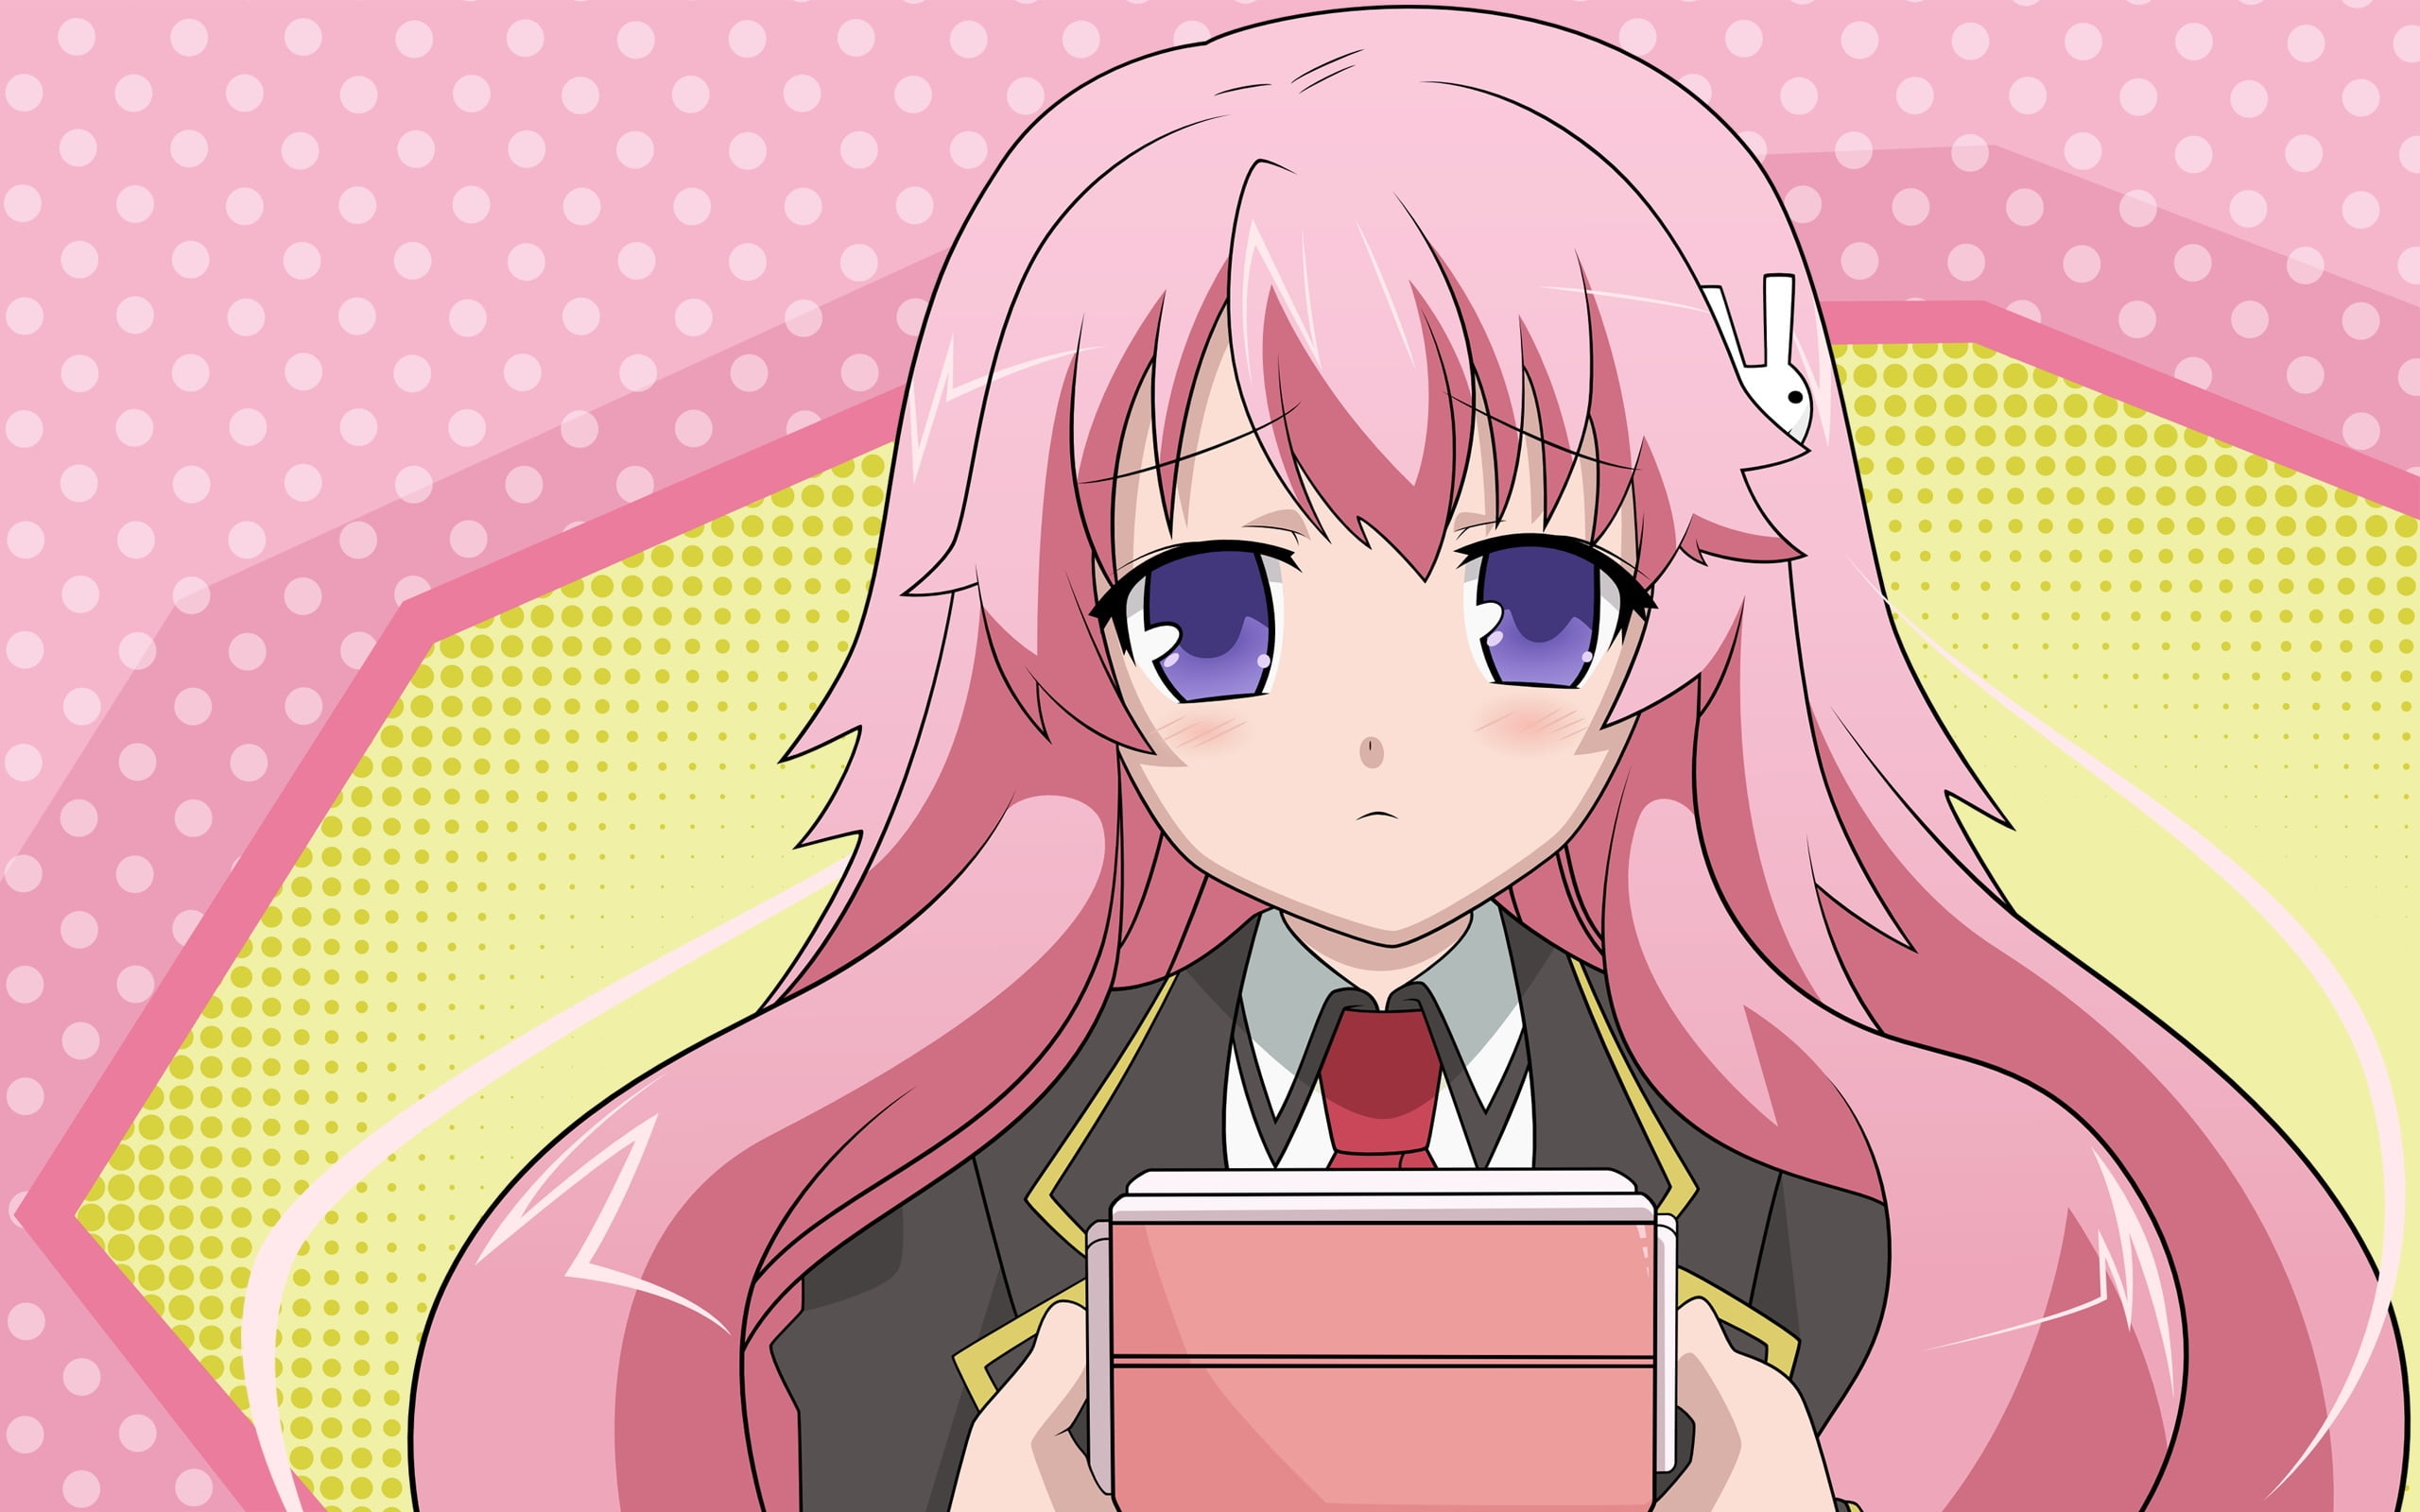 female anime character with pink hair and purple eyes carrying a pink box